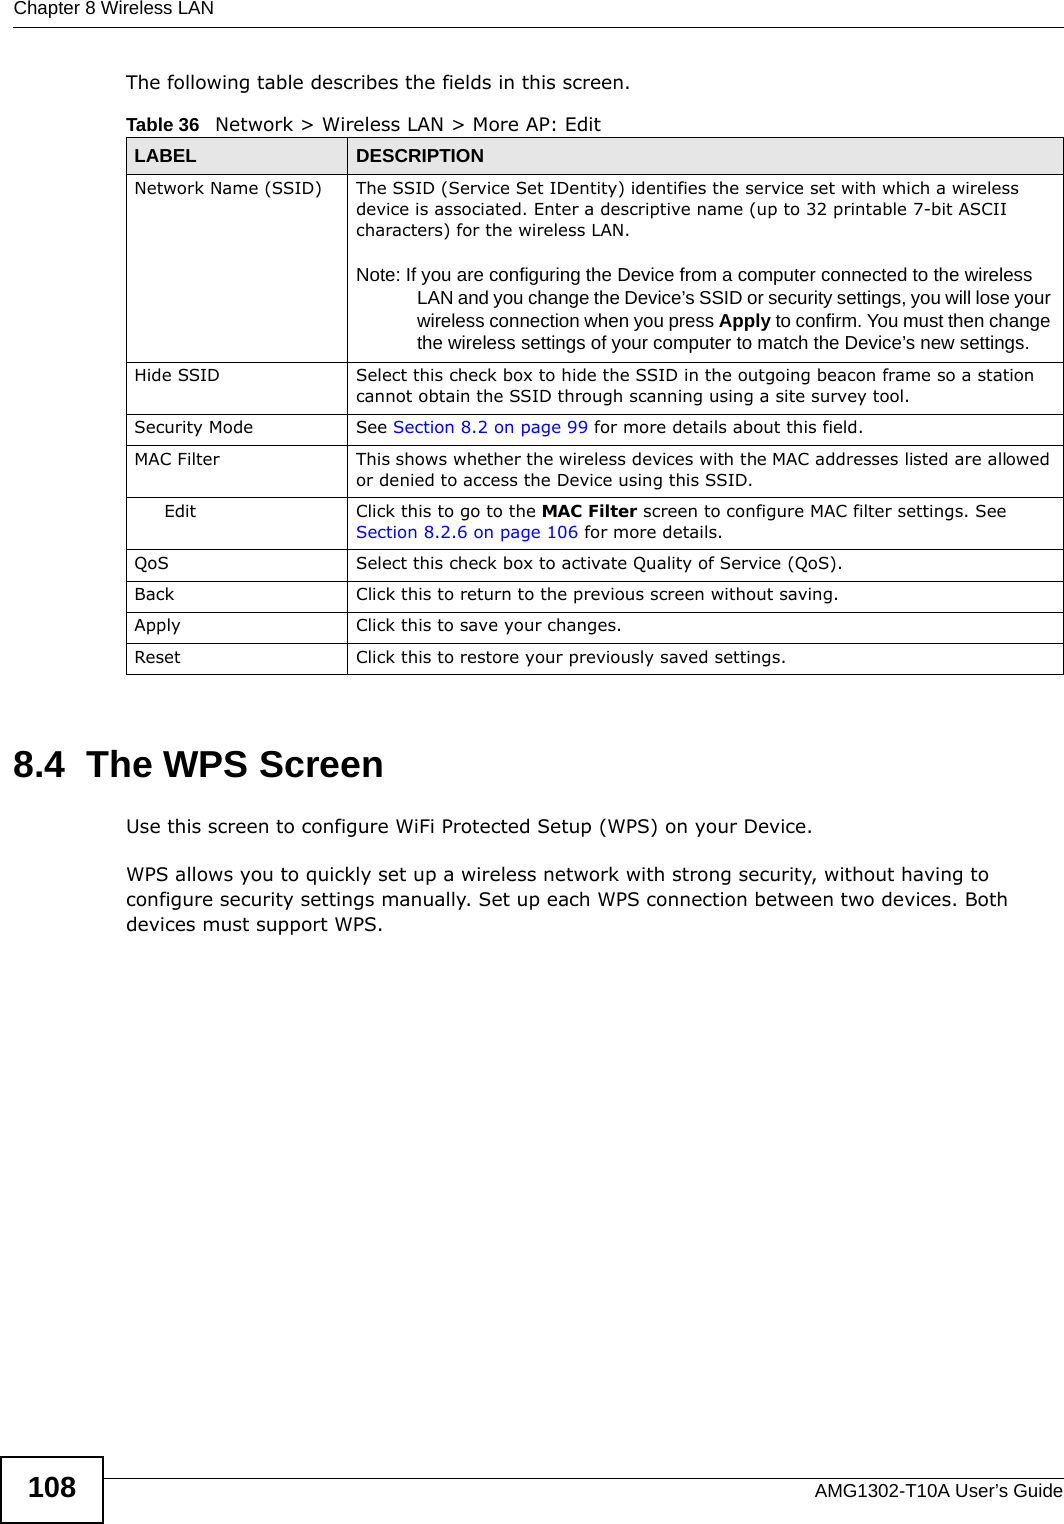 Chapter 8 Wireless LANAMG1302-T10A User’s Guide108The following table describes the fields in this screen.8.4  The WPS ScreenUse this screen to configure WiFi Protected Setup (WPS) on your Device.WPS allows you to quickly set up a wireless network with strong security, without having to configure security settings manually. Set up each WPS connection between two devices. Both devices must support WPS.Table 36   Network &gt; Wireless LAN &gt; More AP: EditLABEL DESCRIPTIONNetwork Name (SSID) The SSID (Service Set IDentity) identifies the service set with which a wireless device is associated. Enter a descriptive name (up to 32 printable 7-bit ASCII characters) for the wireless LAN. Note: If you are configuring the Device from a computer connected to the wireless LAN and you change the Device’s SSID or security settings, you will lose your wireless connection when you press Apply to confirm. You must then change the wireless settings of your computer to match the Device’s new settings.Hide SSID Select this check box to hide the SSID in the outgoing beacon frame so a station cannot obtain the SSID through scanning using a site survey tool.Security Mode See Section 8.2 on page 99 for more details about this field.MAC Filter  This shows whether the wireless devices with the MAC addresses listed are allowed or denied to access the Device using this SSID.Edit Click this to go to the MAC Filter screen to configure MAC filter settings. See Section 8.2.6 on page 106 for more details.QoS Select this check box to activate Quality of Service (QoS).Back Click this to return to the previous screen without saving.Apply Click this to save your changes.Reset Click this to restore your previously saved settings.